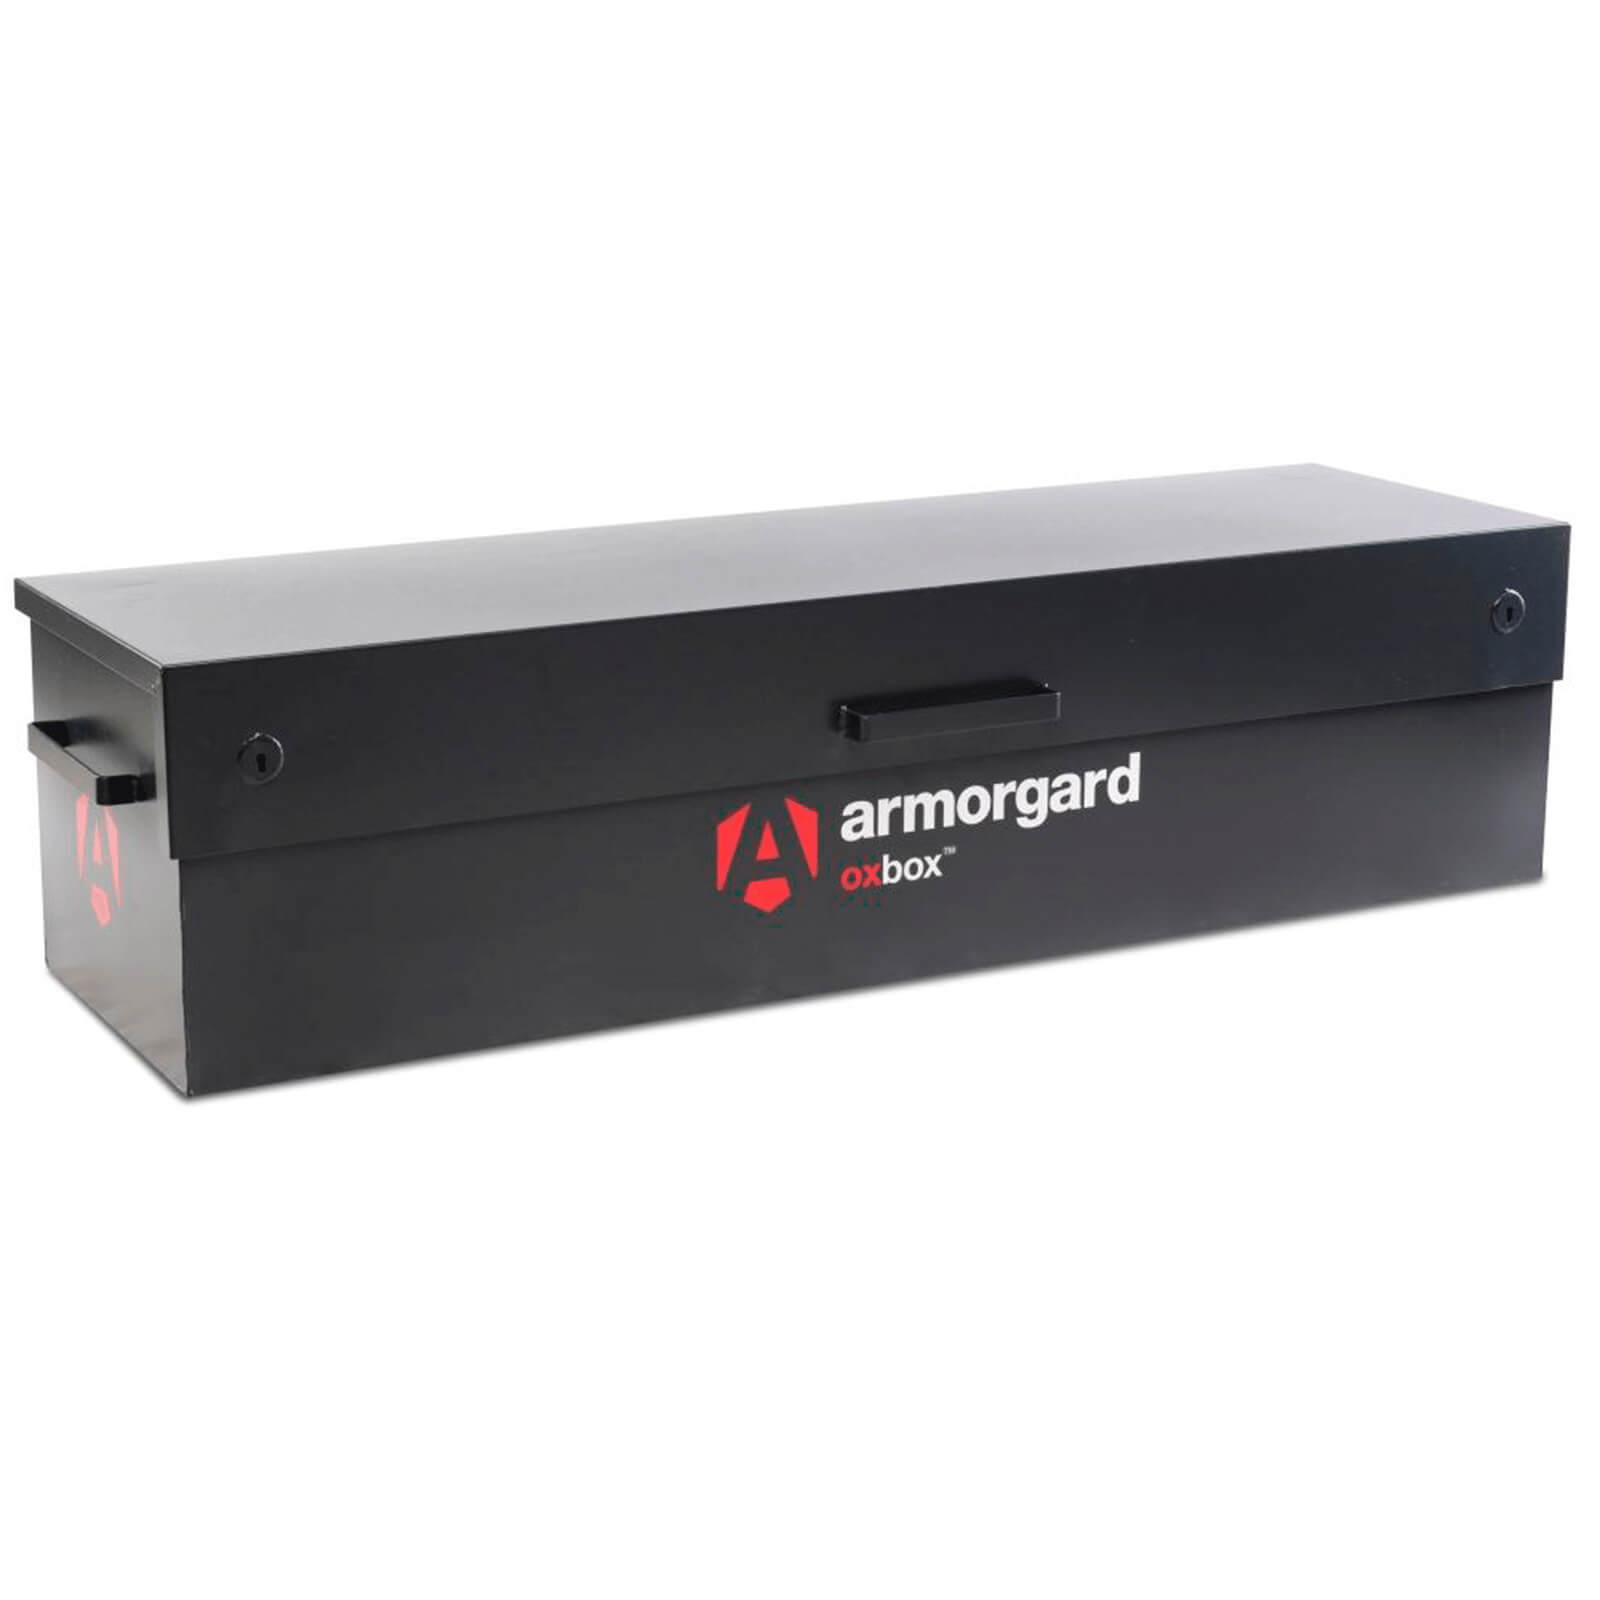 Image of Armorgard Oxbox Secure Truck Storage Box 1800mm 555mm 445mm